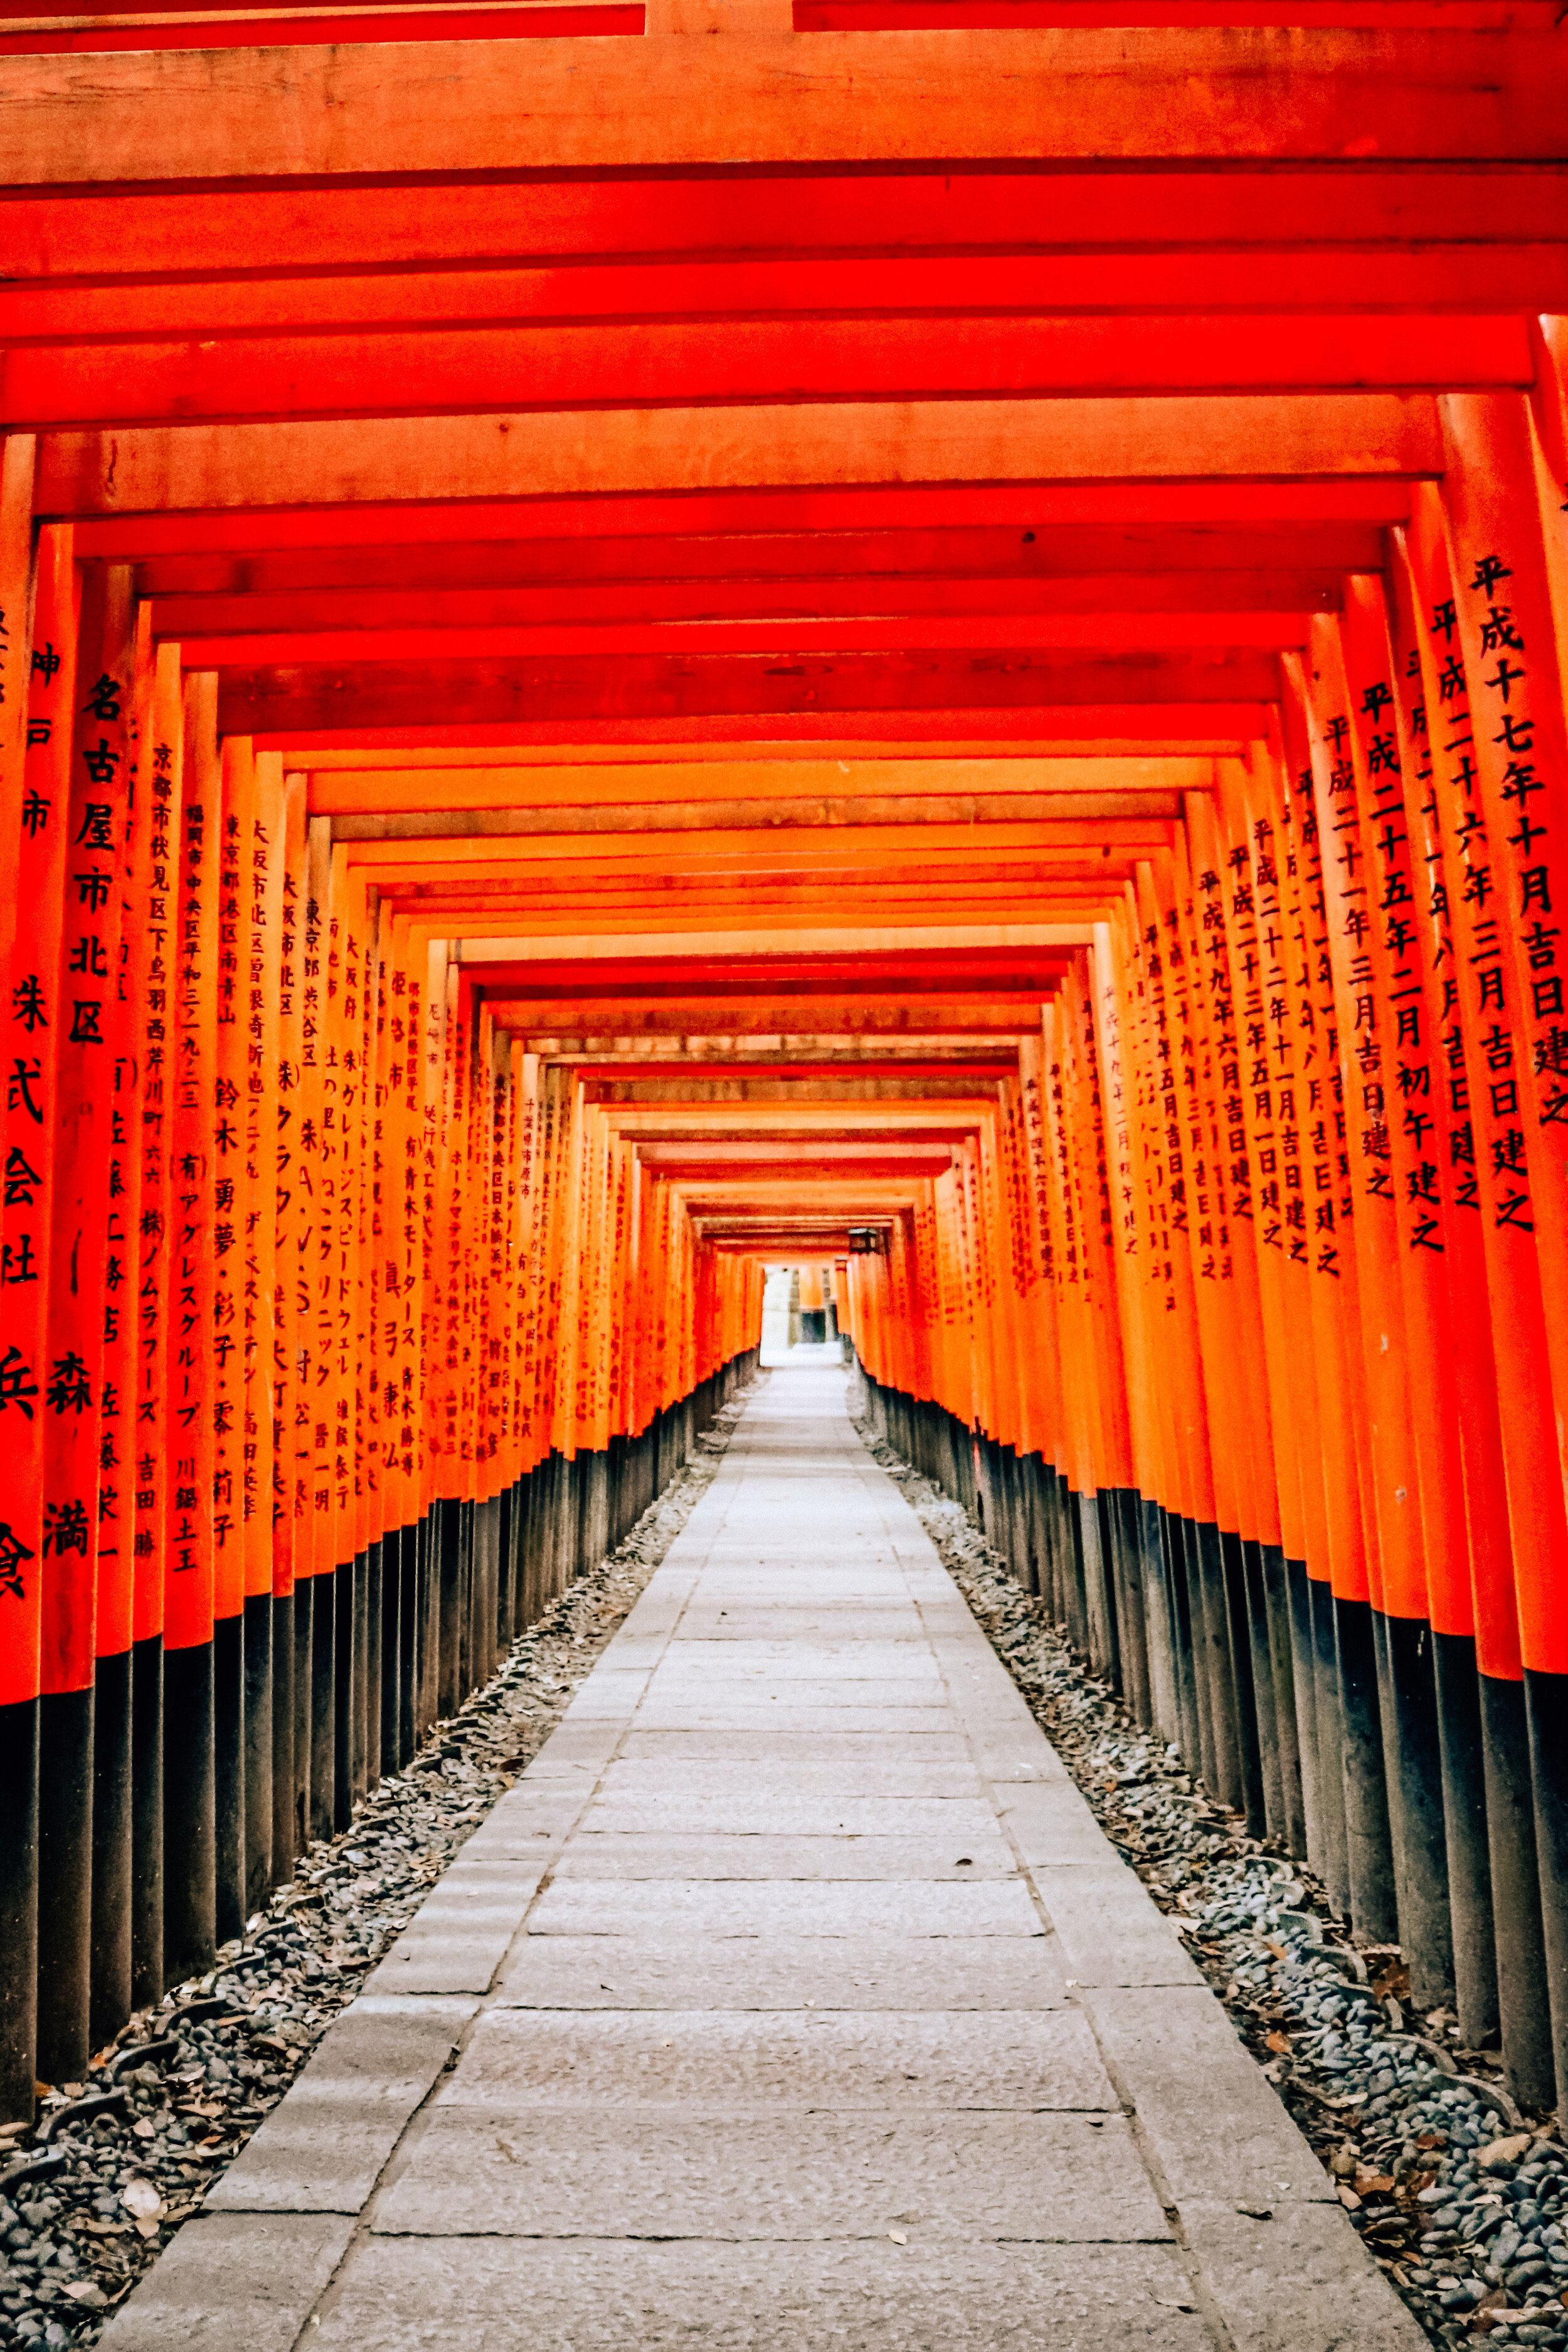 Many orange torii gates in a row with a path running through the center